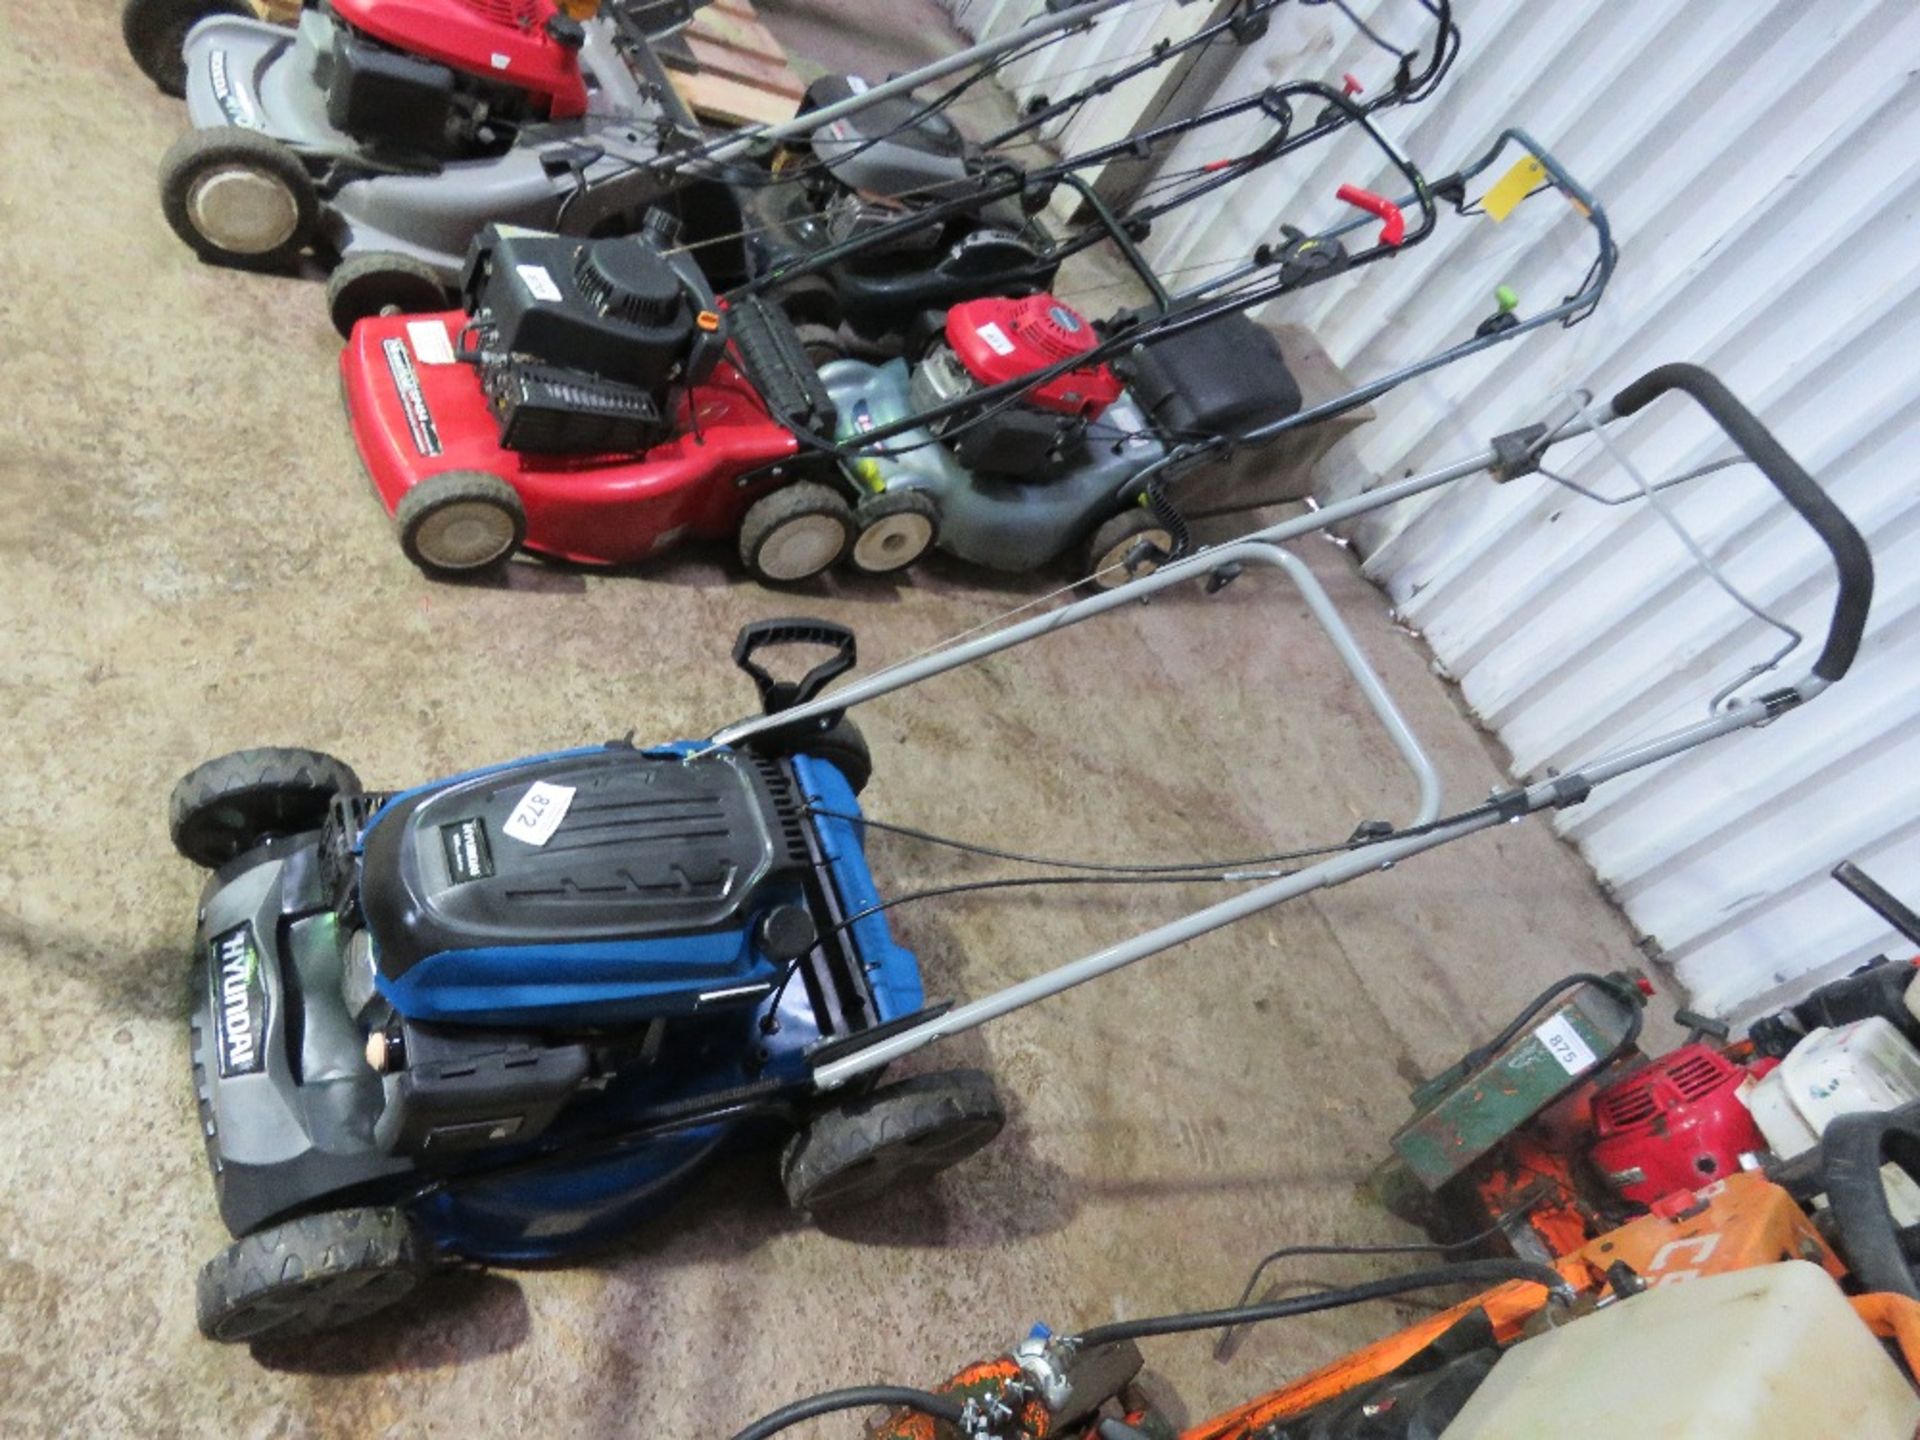 HYUNDAI PETROL ENGINED LAWN MOWER, NO COLLECTOR. THIS LOT IS SOLD UNDER THE AUCTIONEERS MARGIN SC - Image 2 of 3